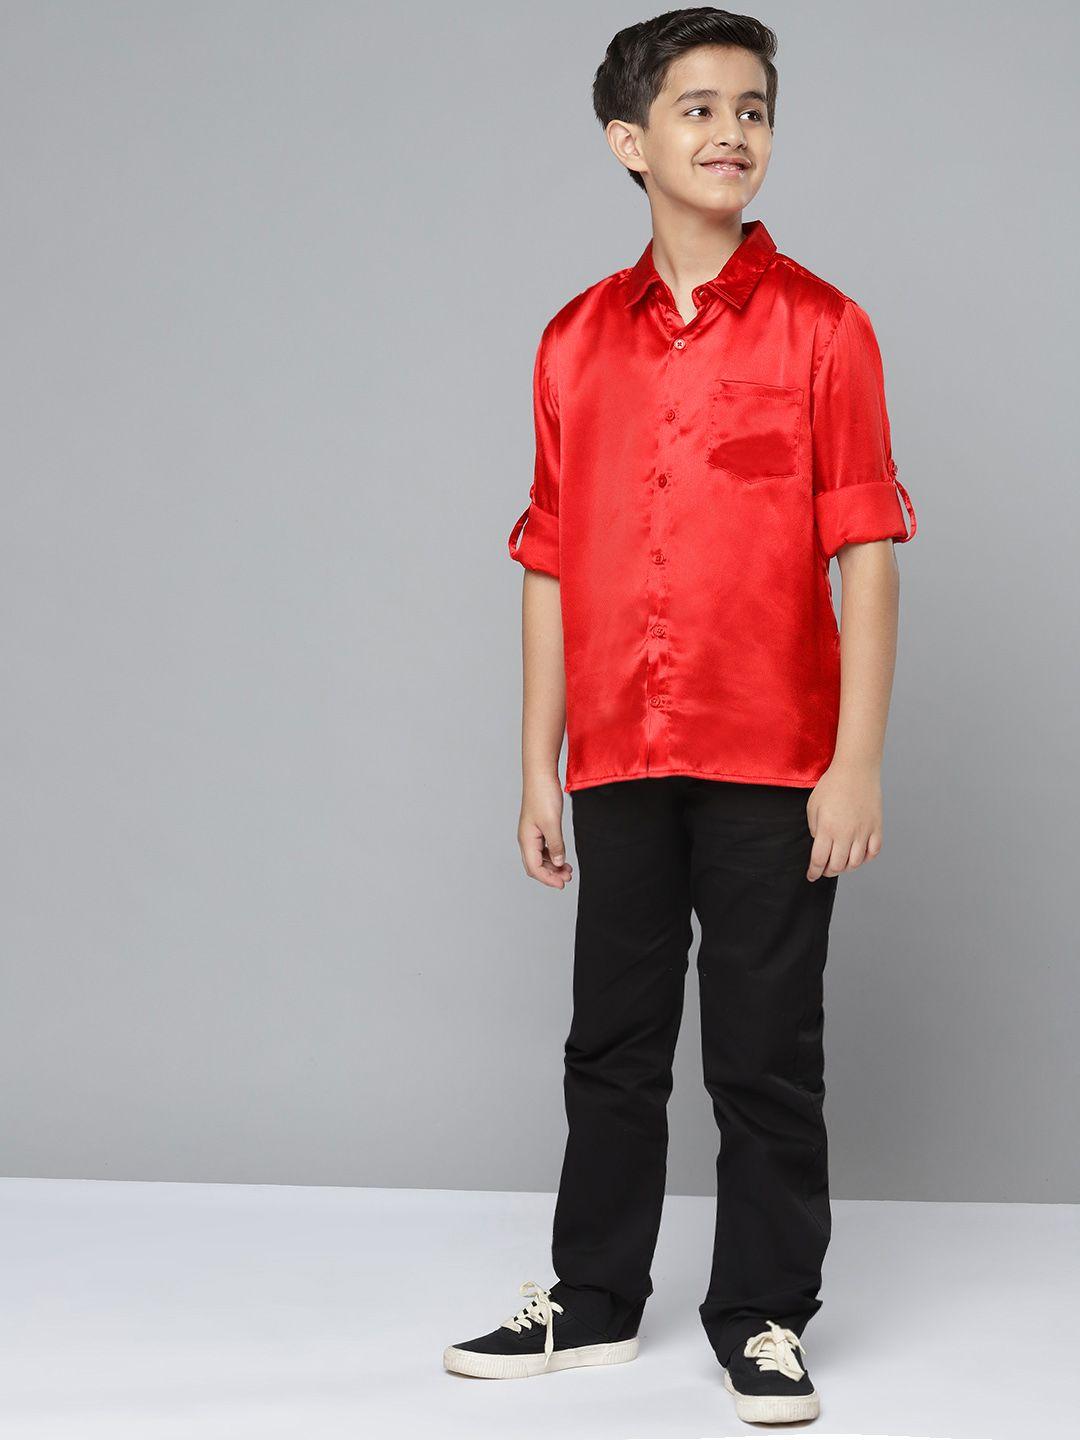 yk-boys-red-&-black-solid-shirt-with-trousers